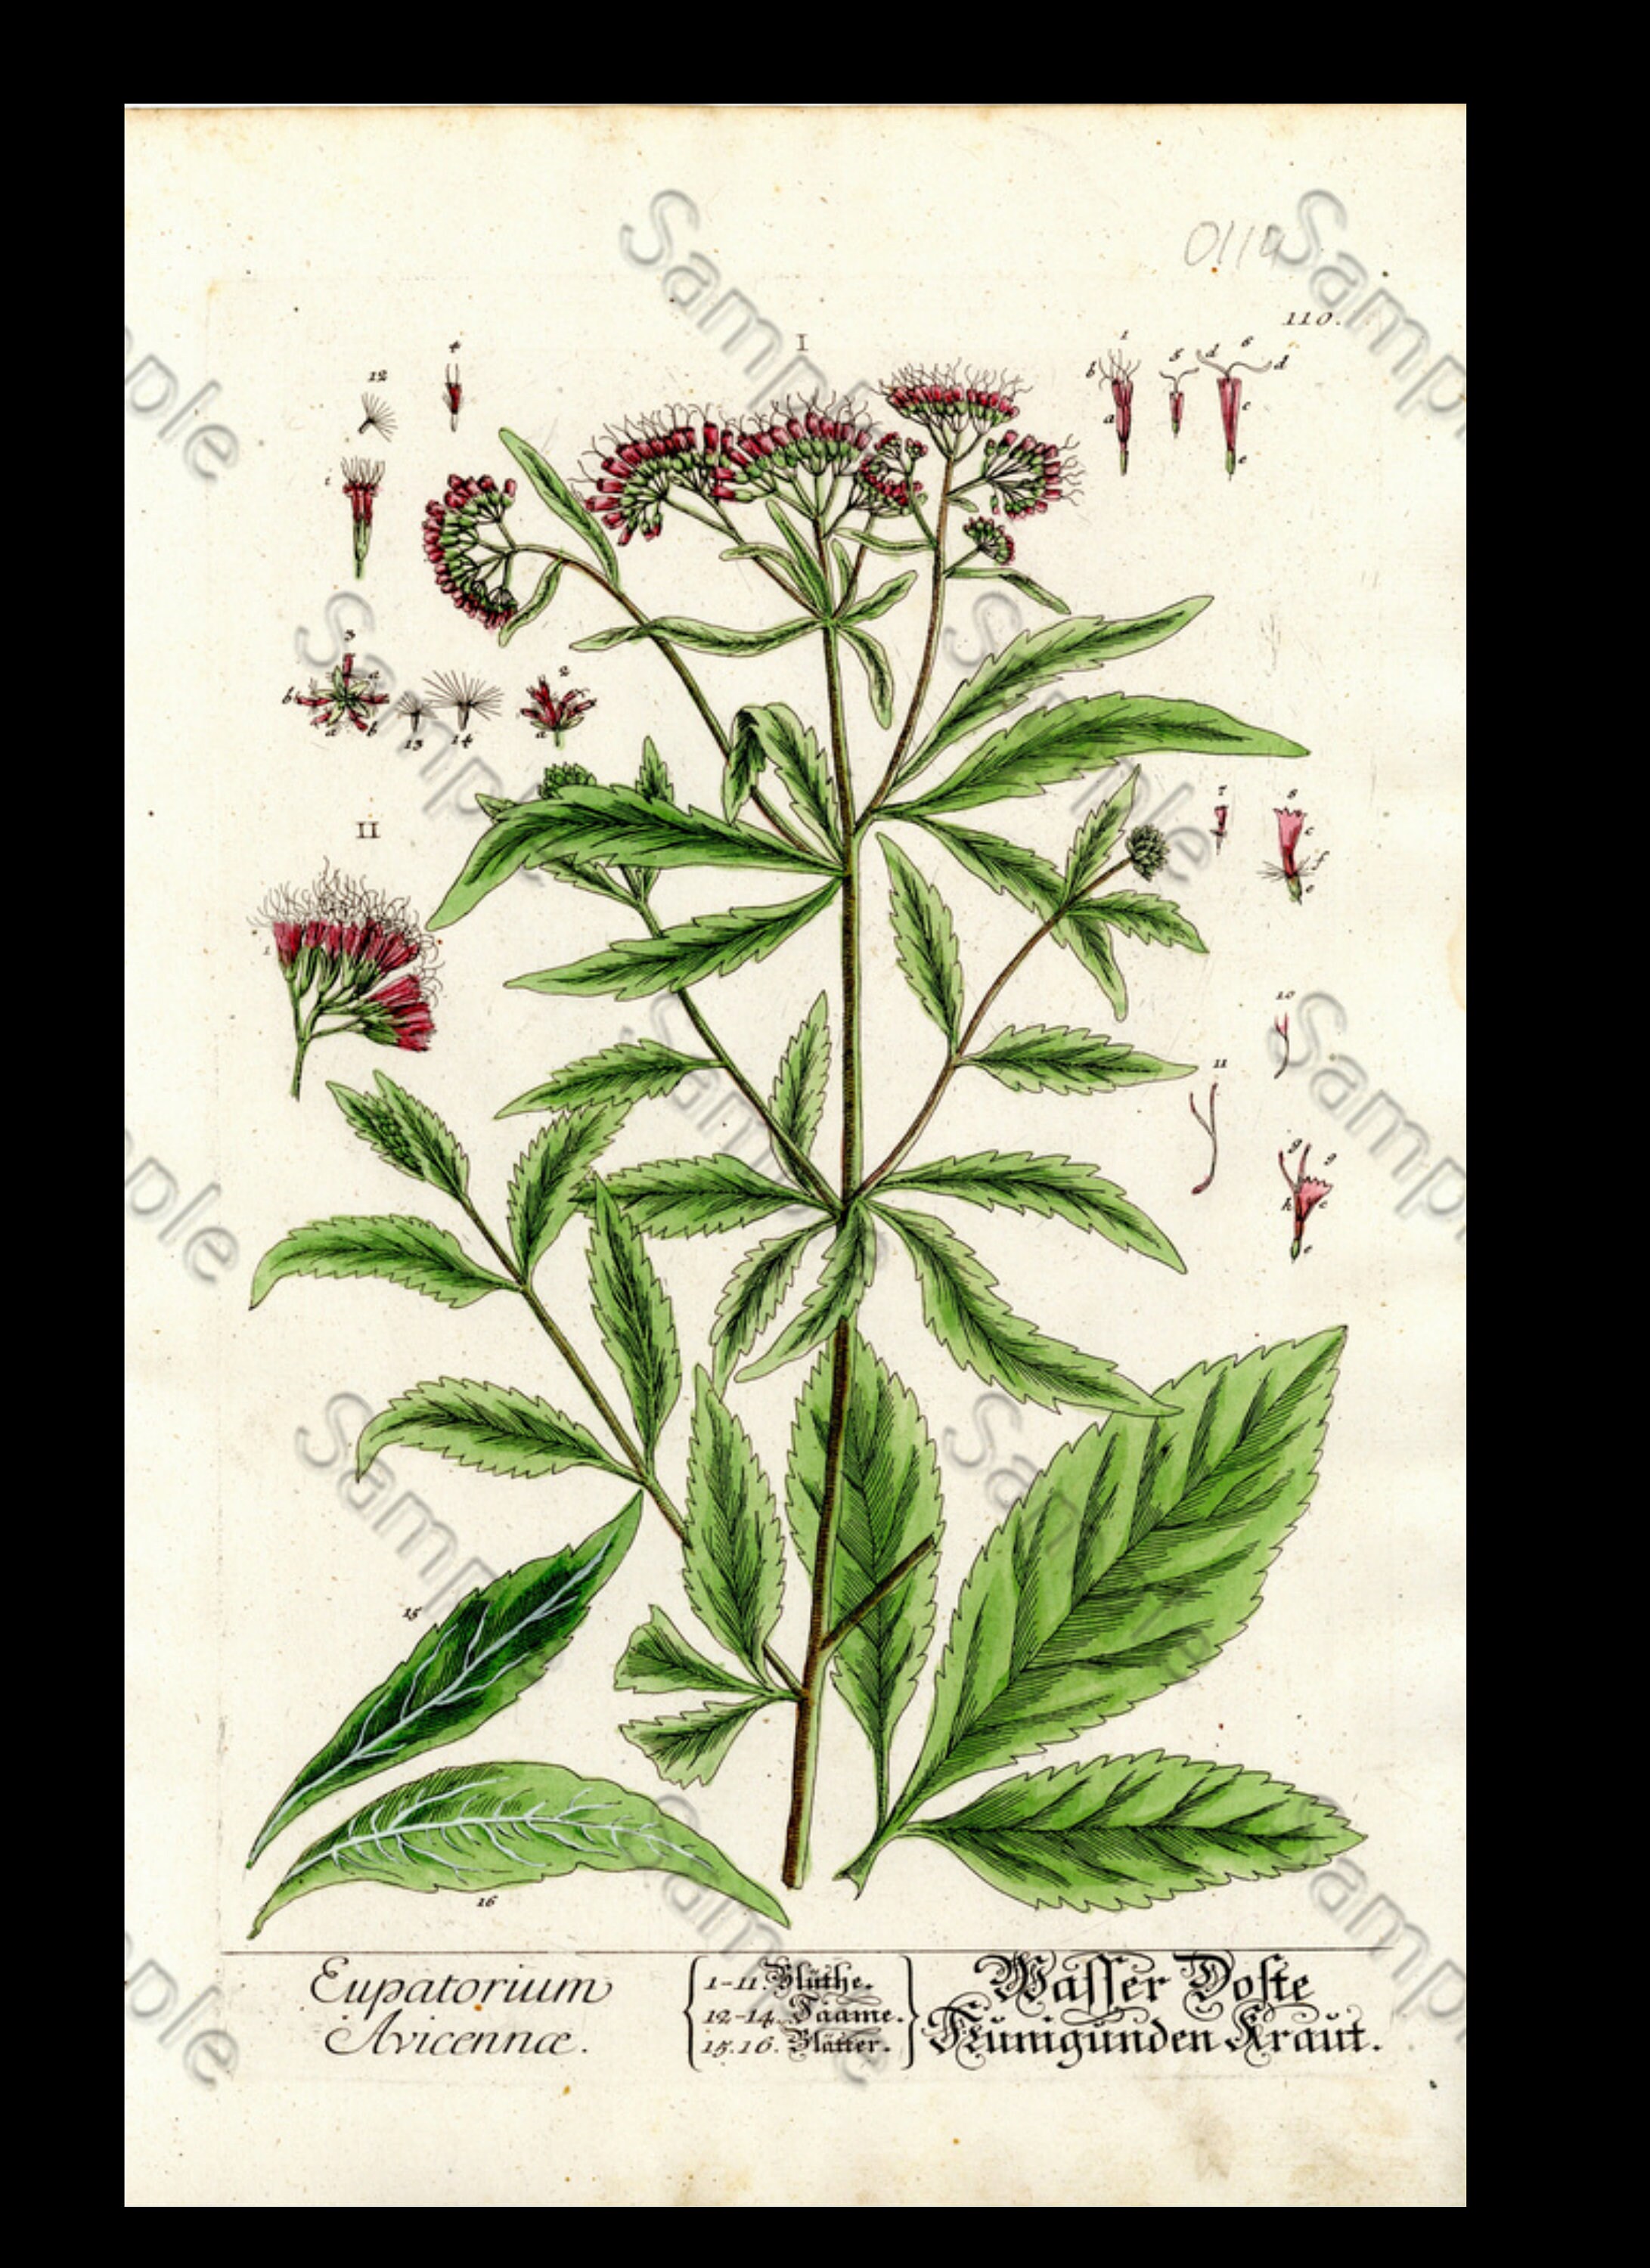 Phobia skuffe dosis Buy Eupatorium Avicennce Botanical Hand Colored Engraving Online in India -  Etsy